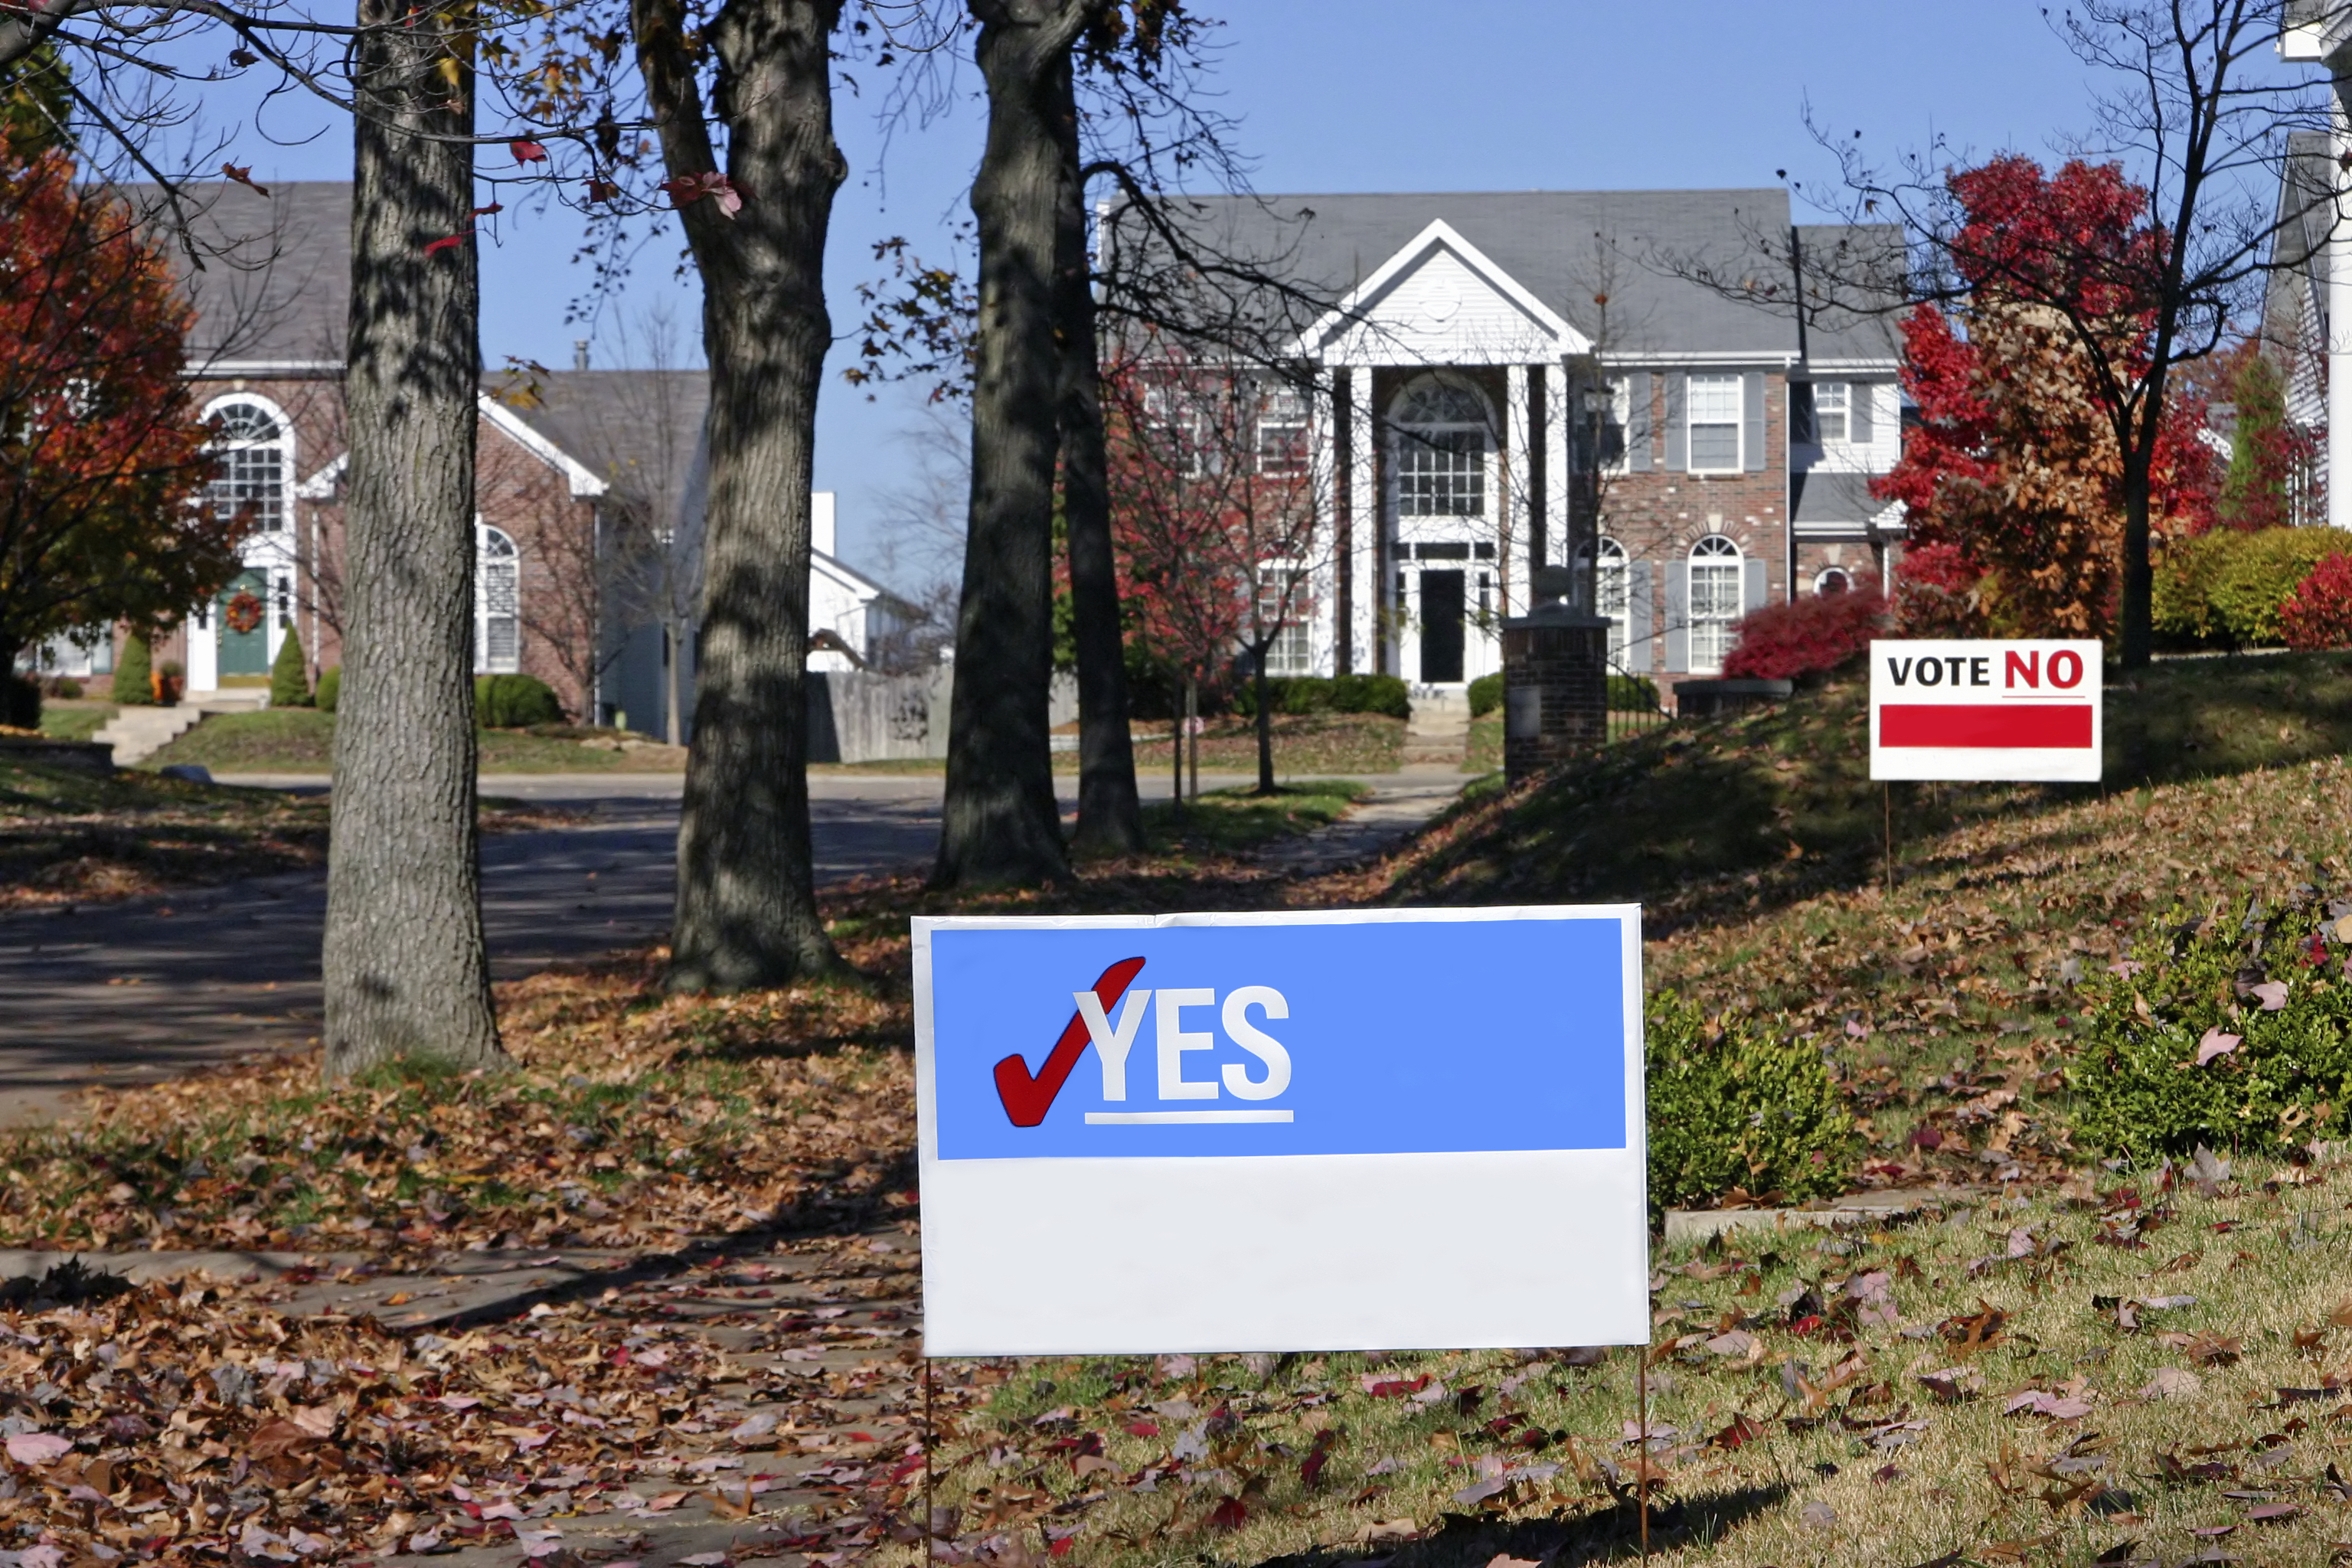 Yard sign advertising political messages